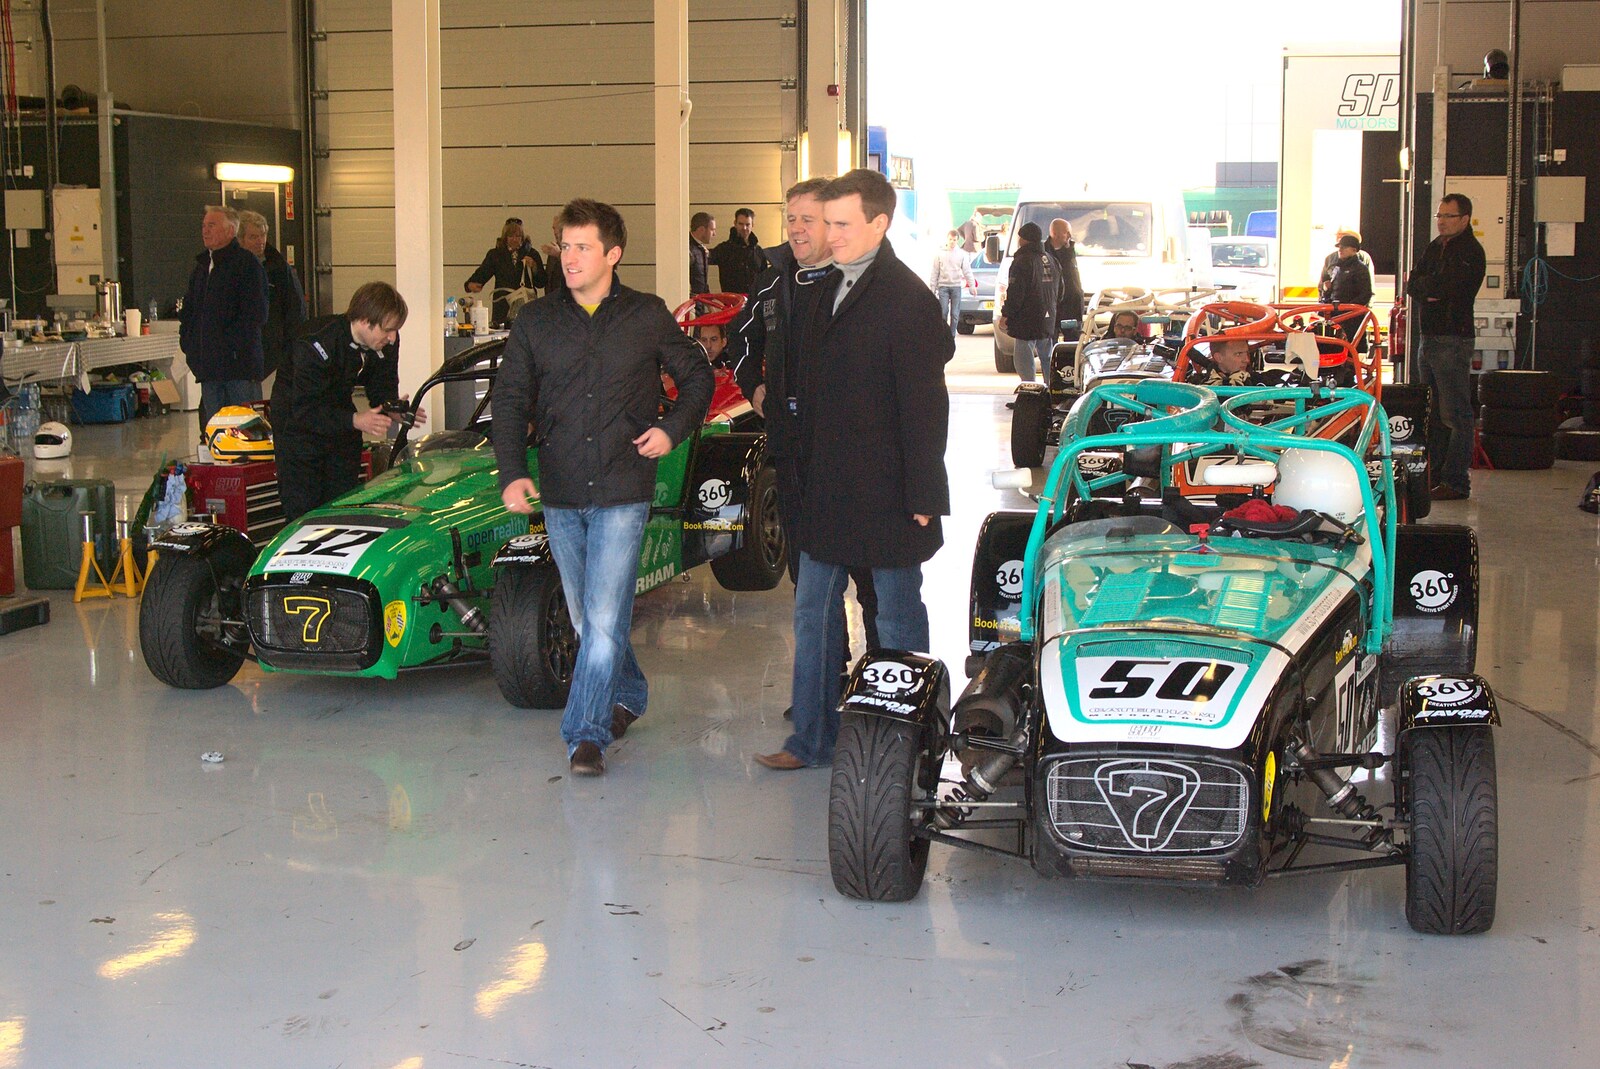 Caterham Sevens in the workshops from TouchType at Silverstone, Northamptonshire - 22nd October 2011